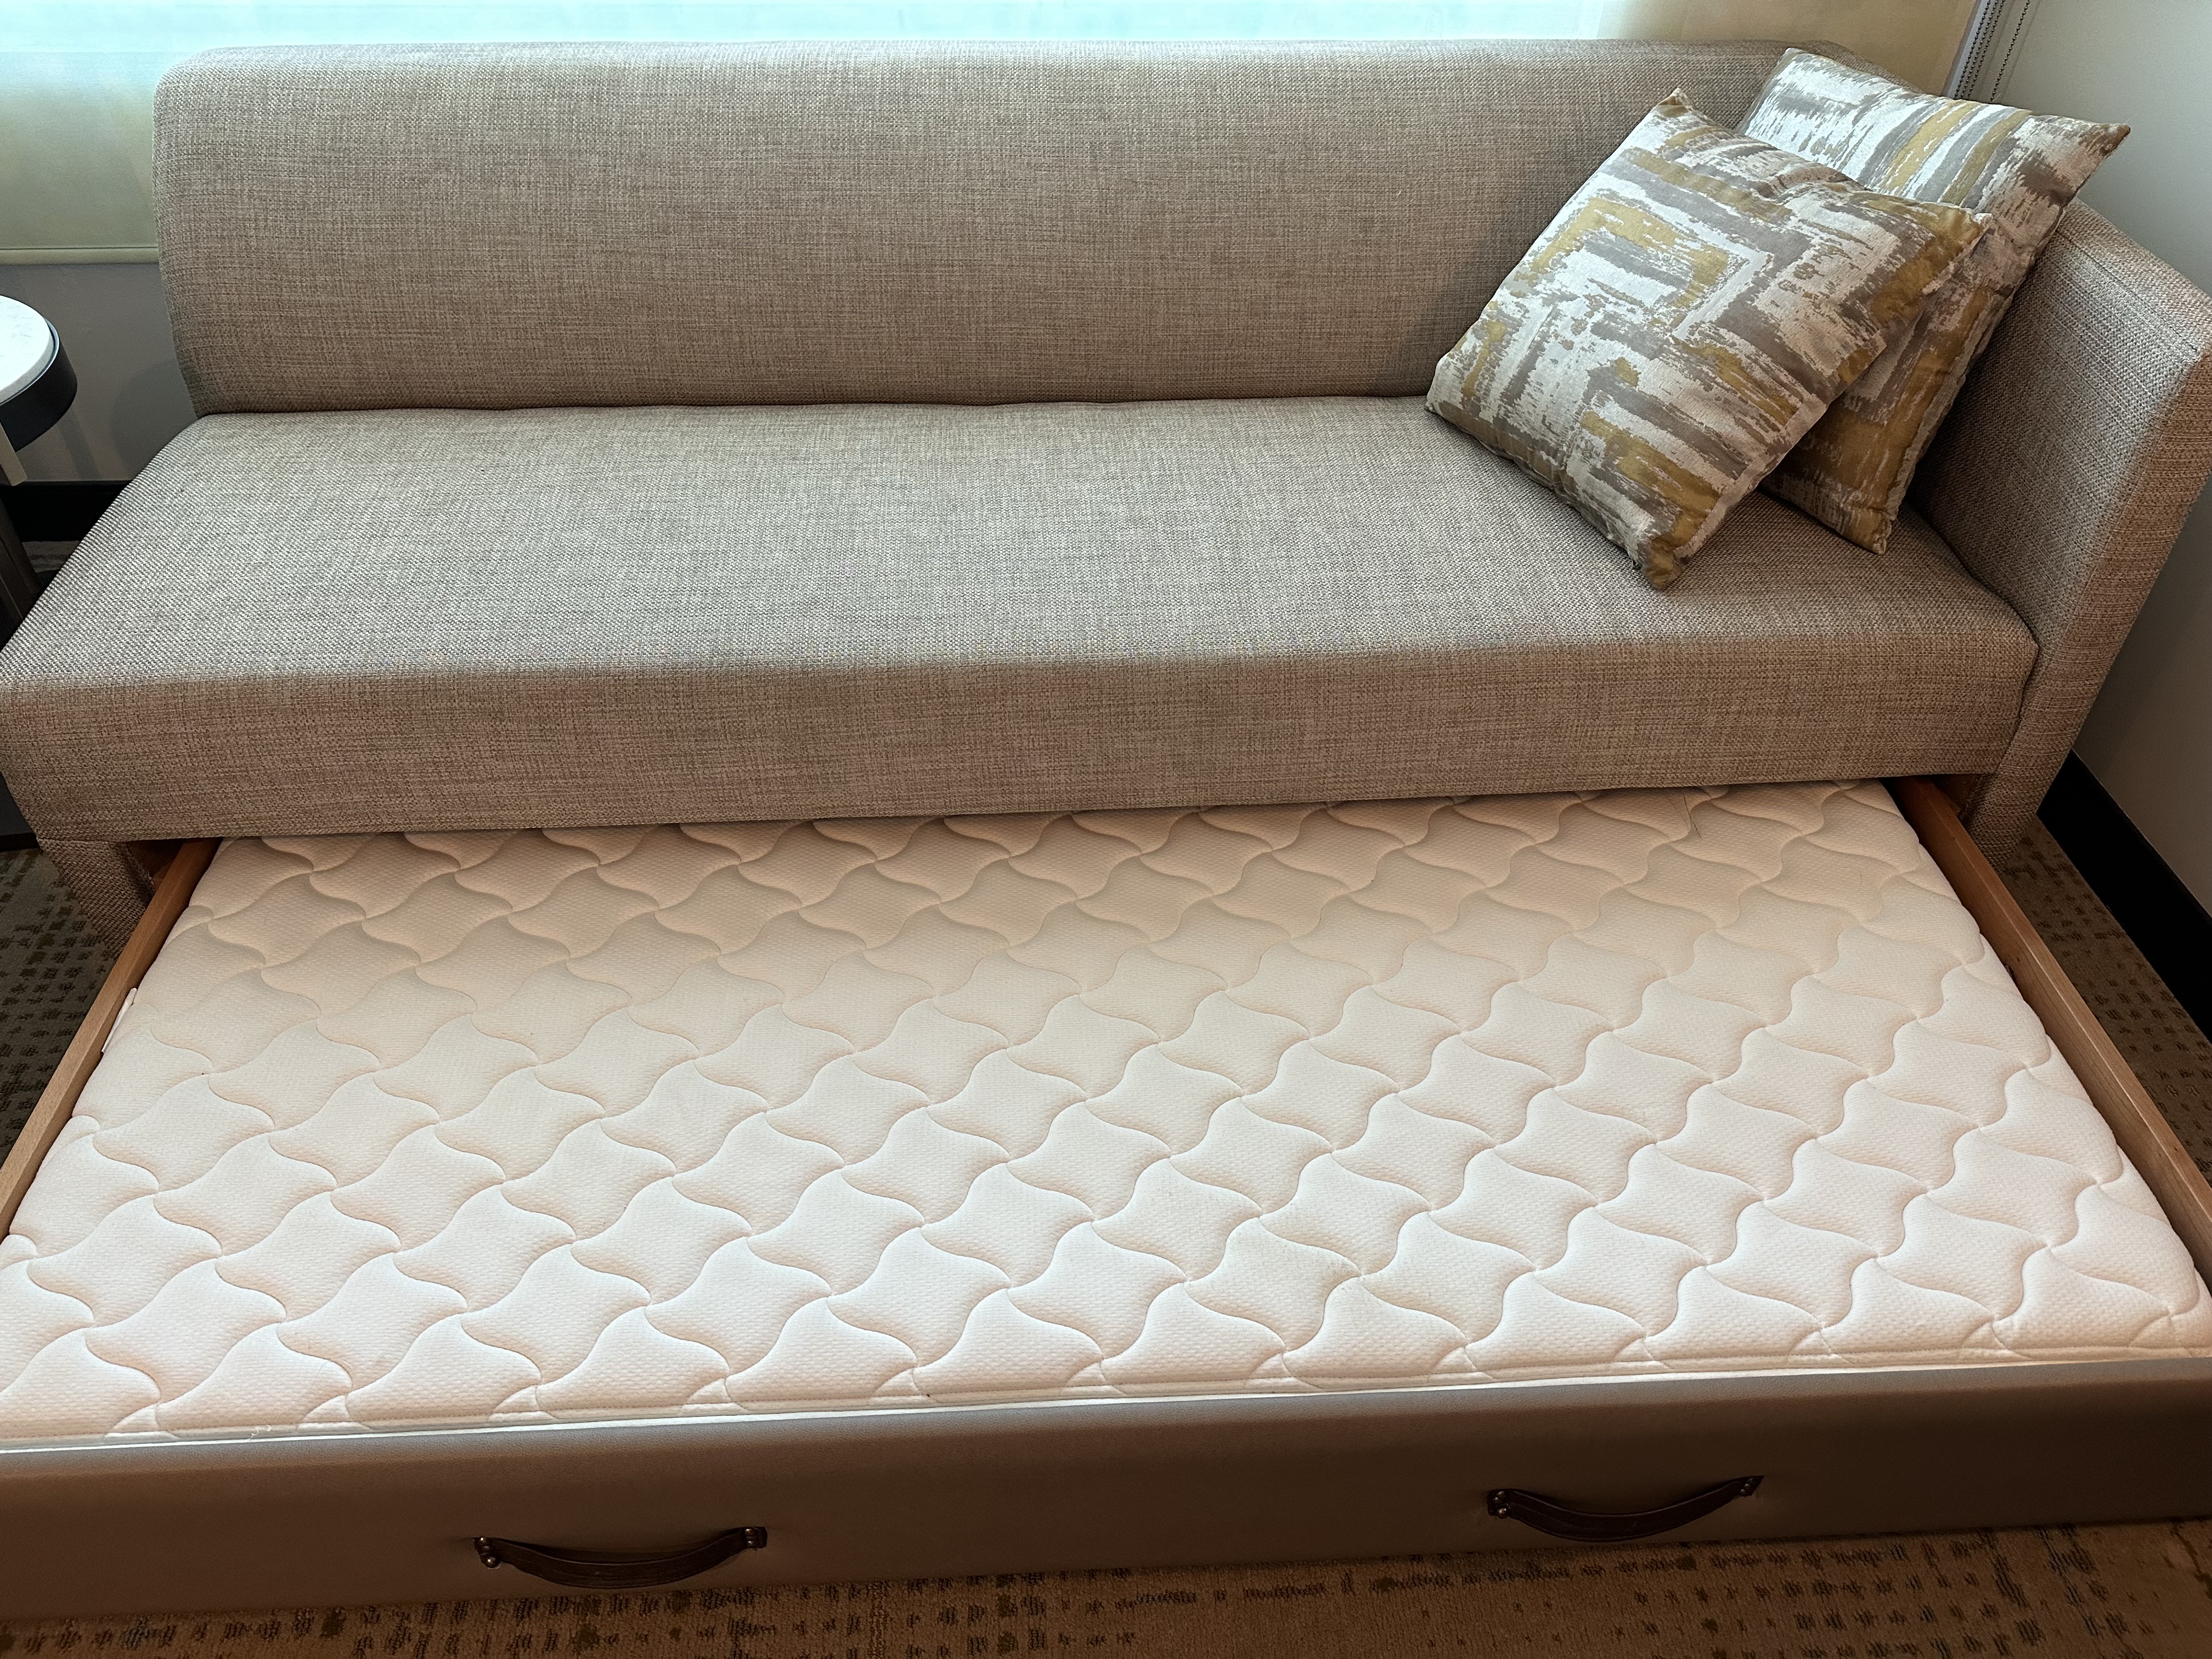 a couch with a mattress